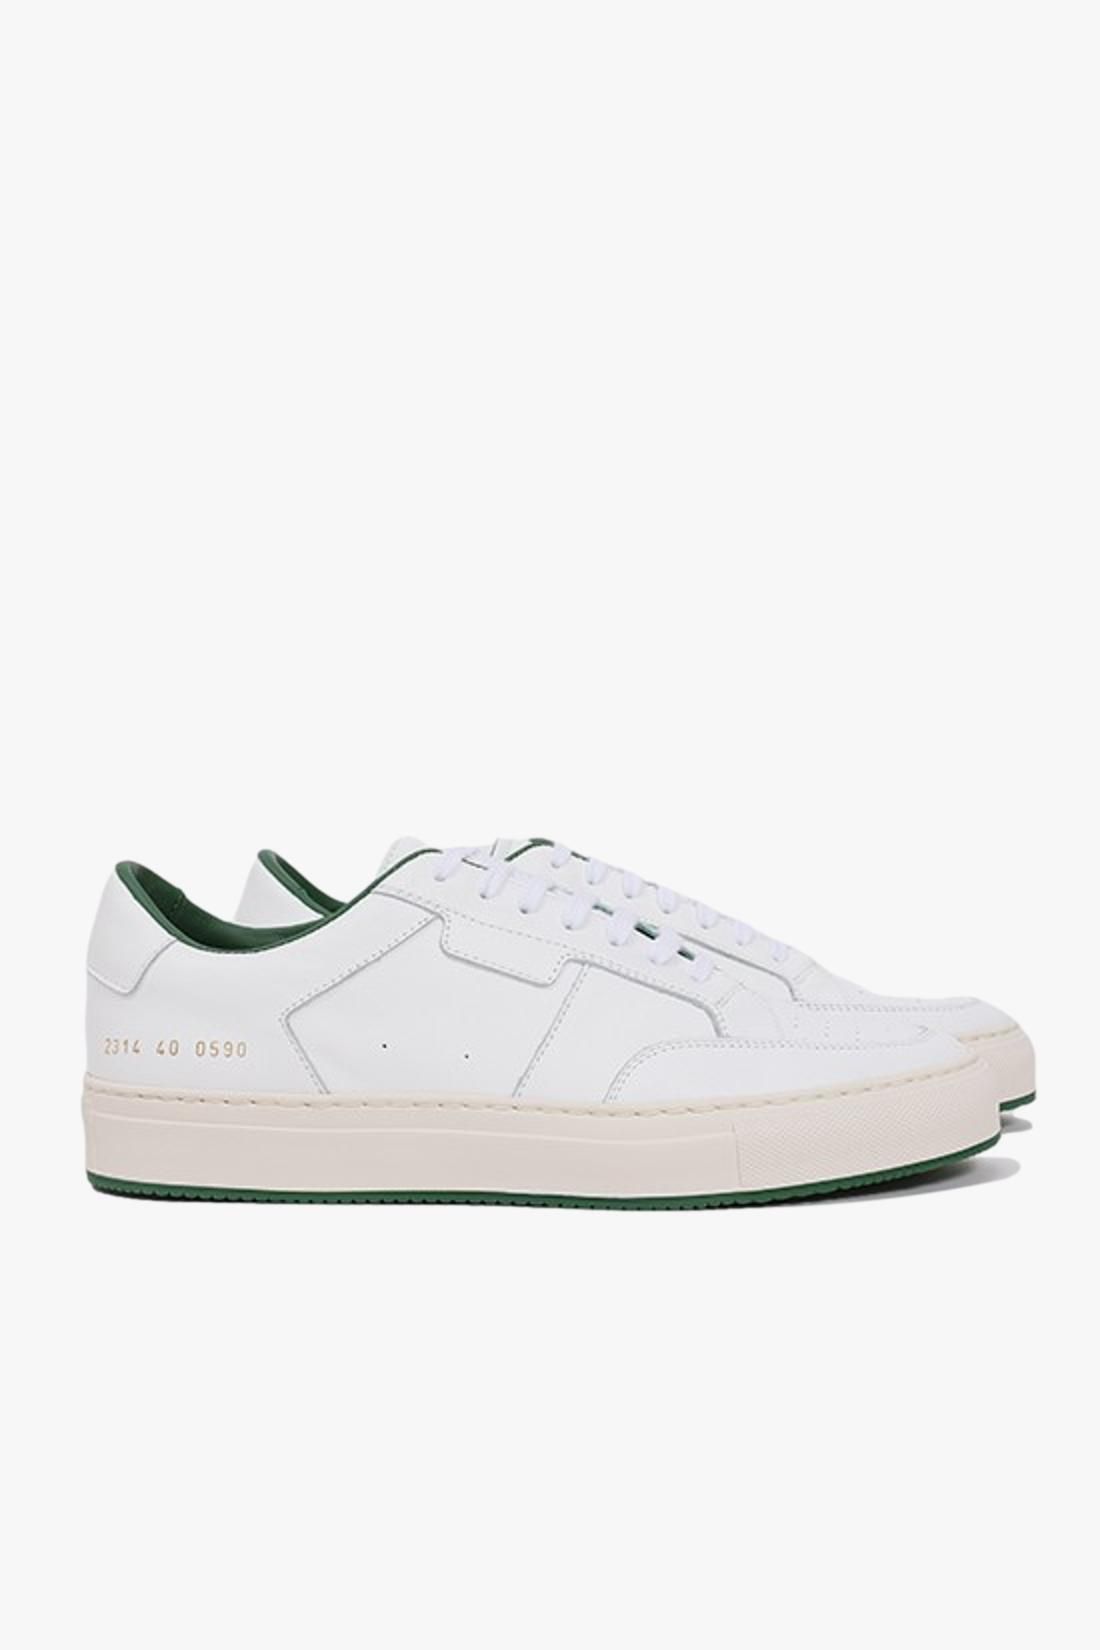 COMMON PROJECTS / Tennis 2314 White/green